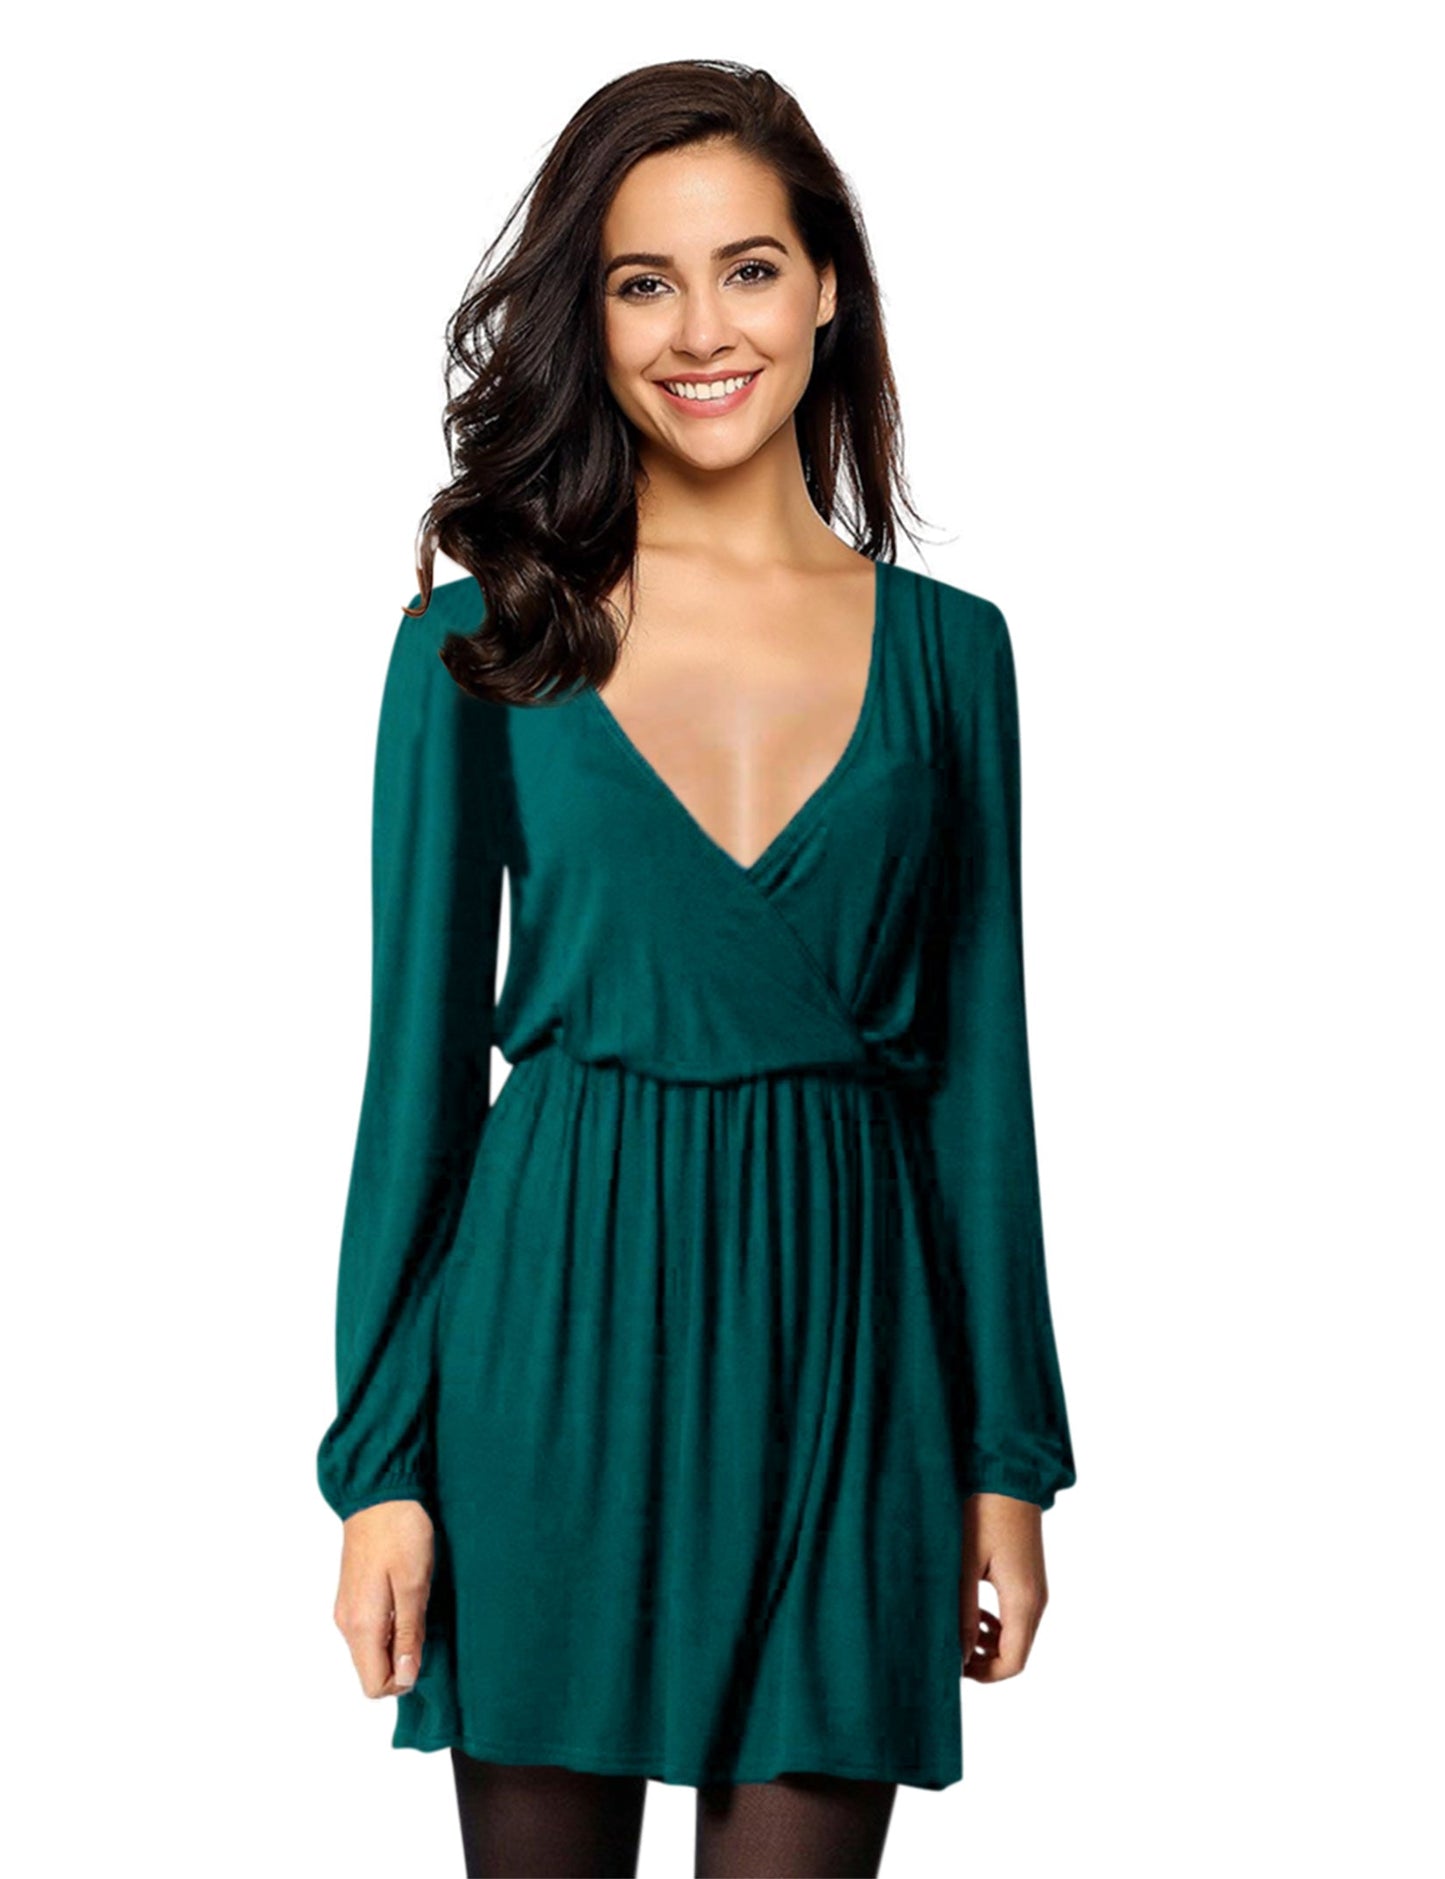 YESFASHION Women V-Neck A-Line Solid Plain Party Casual Mini Dress Blue Green